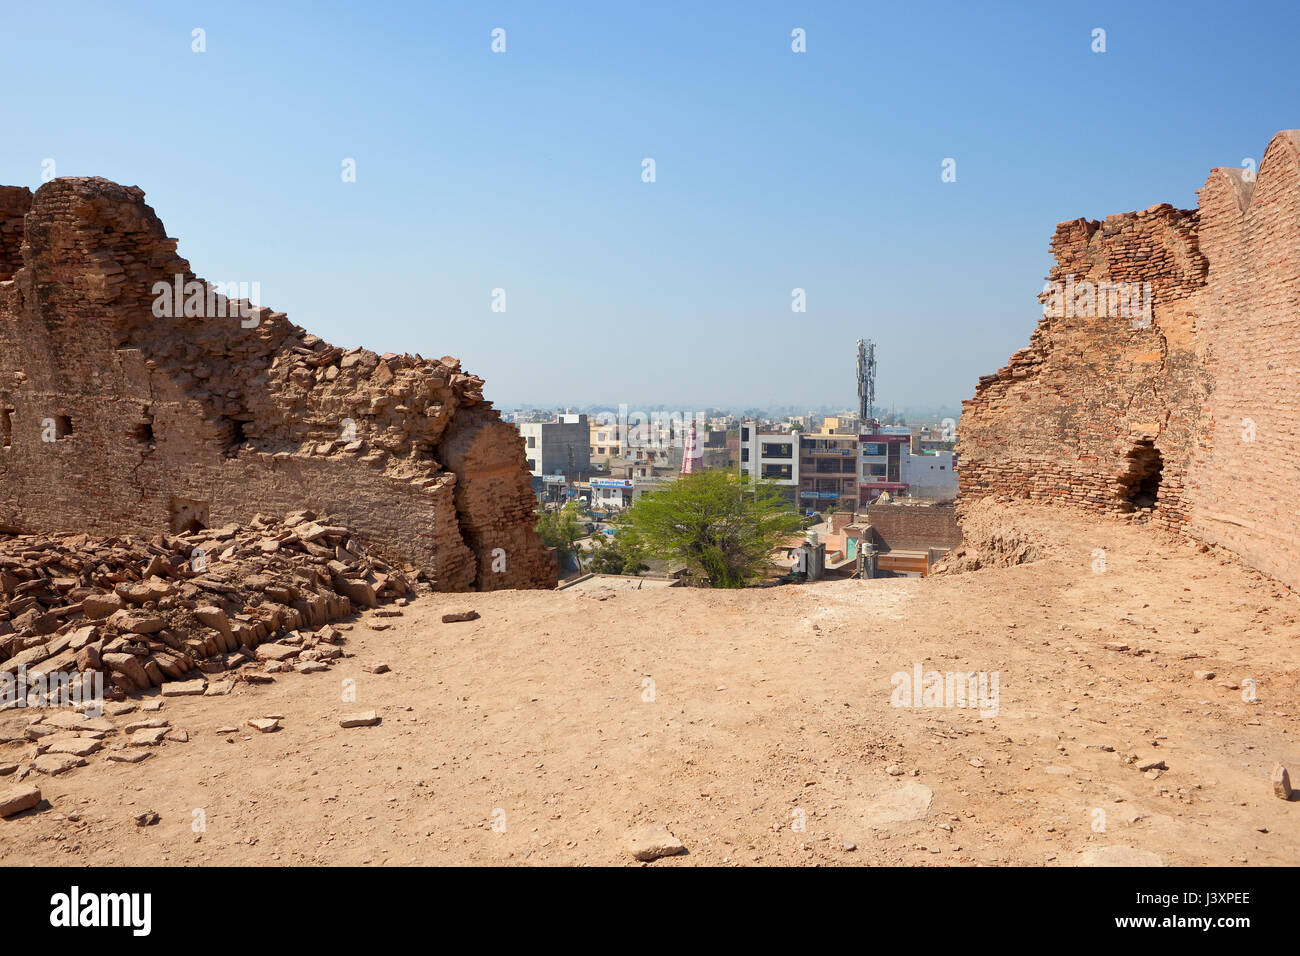 hanumangarh city rajasthan india viewed from walls undergoing restoration at bhatner fort with brick rubble and acacia trees under a blue sky in sprin Stock Photo